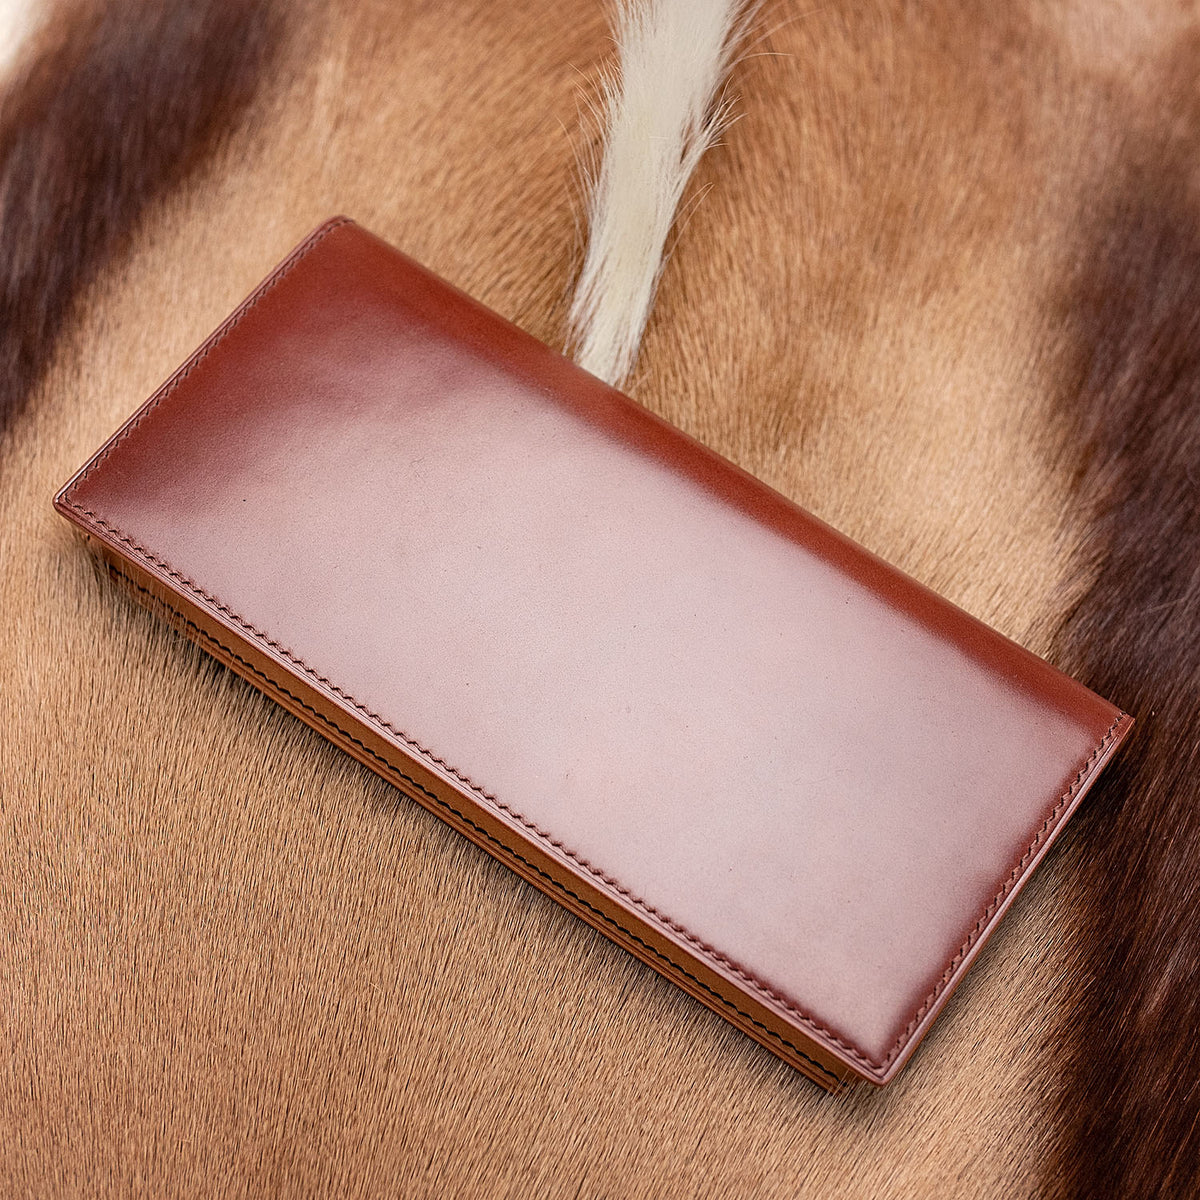 It's On Sale: Shell Cordovan Wallets – Put This On